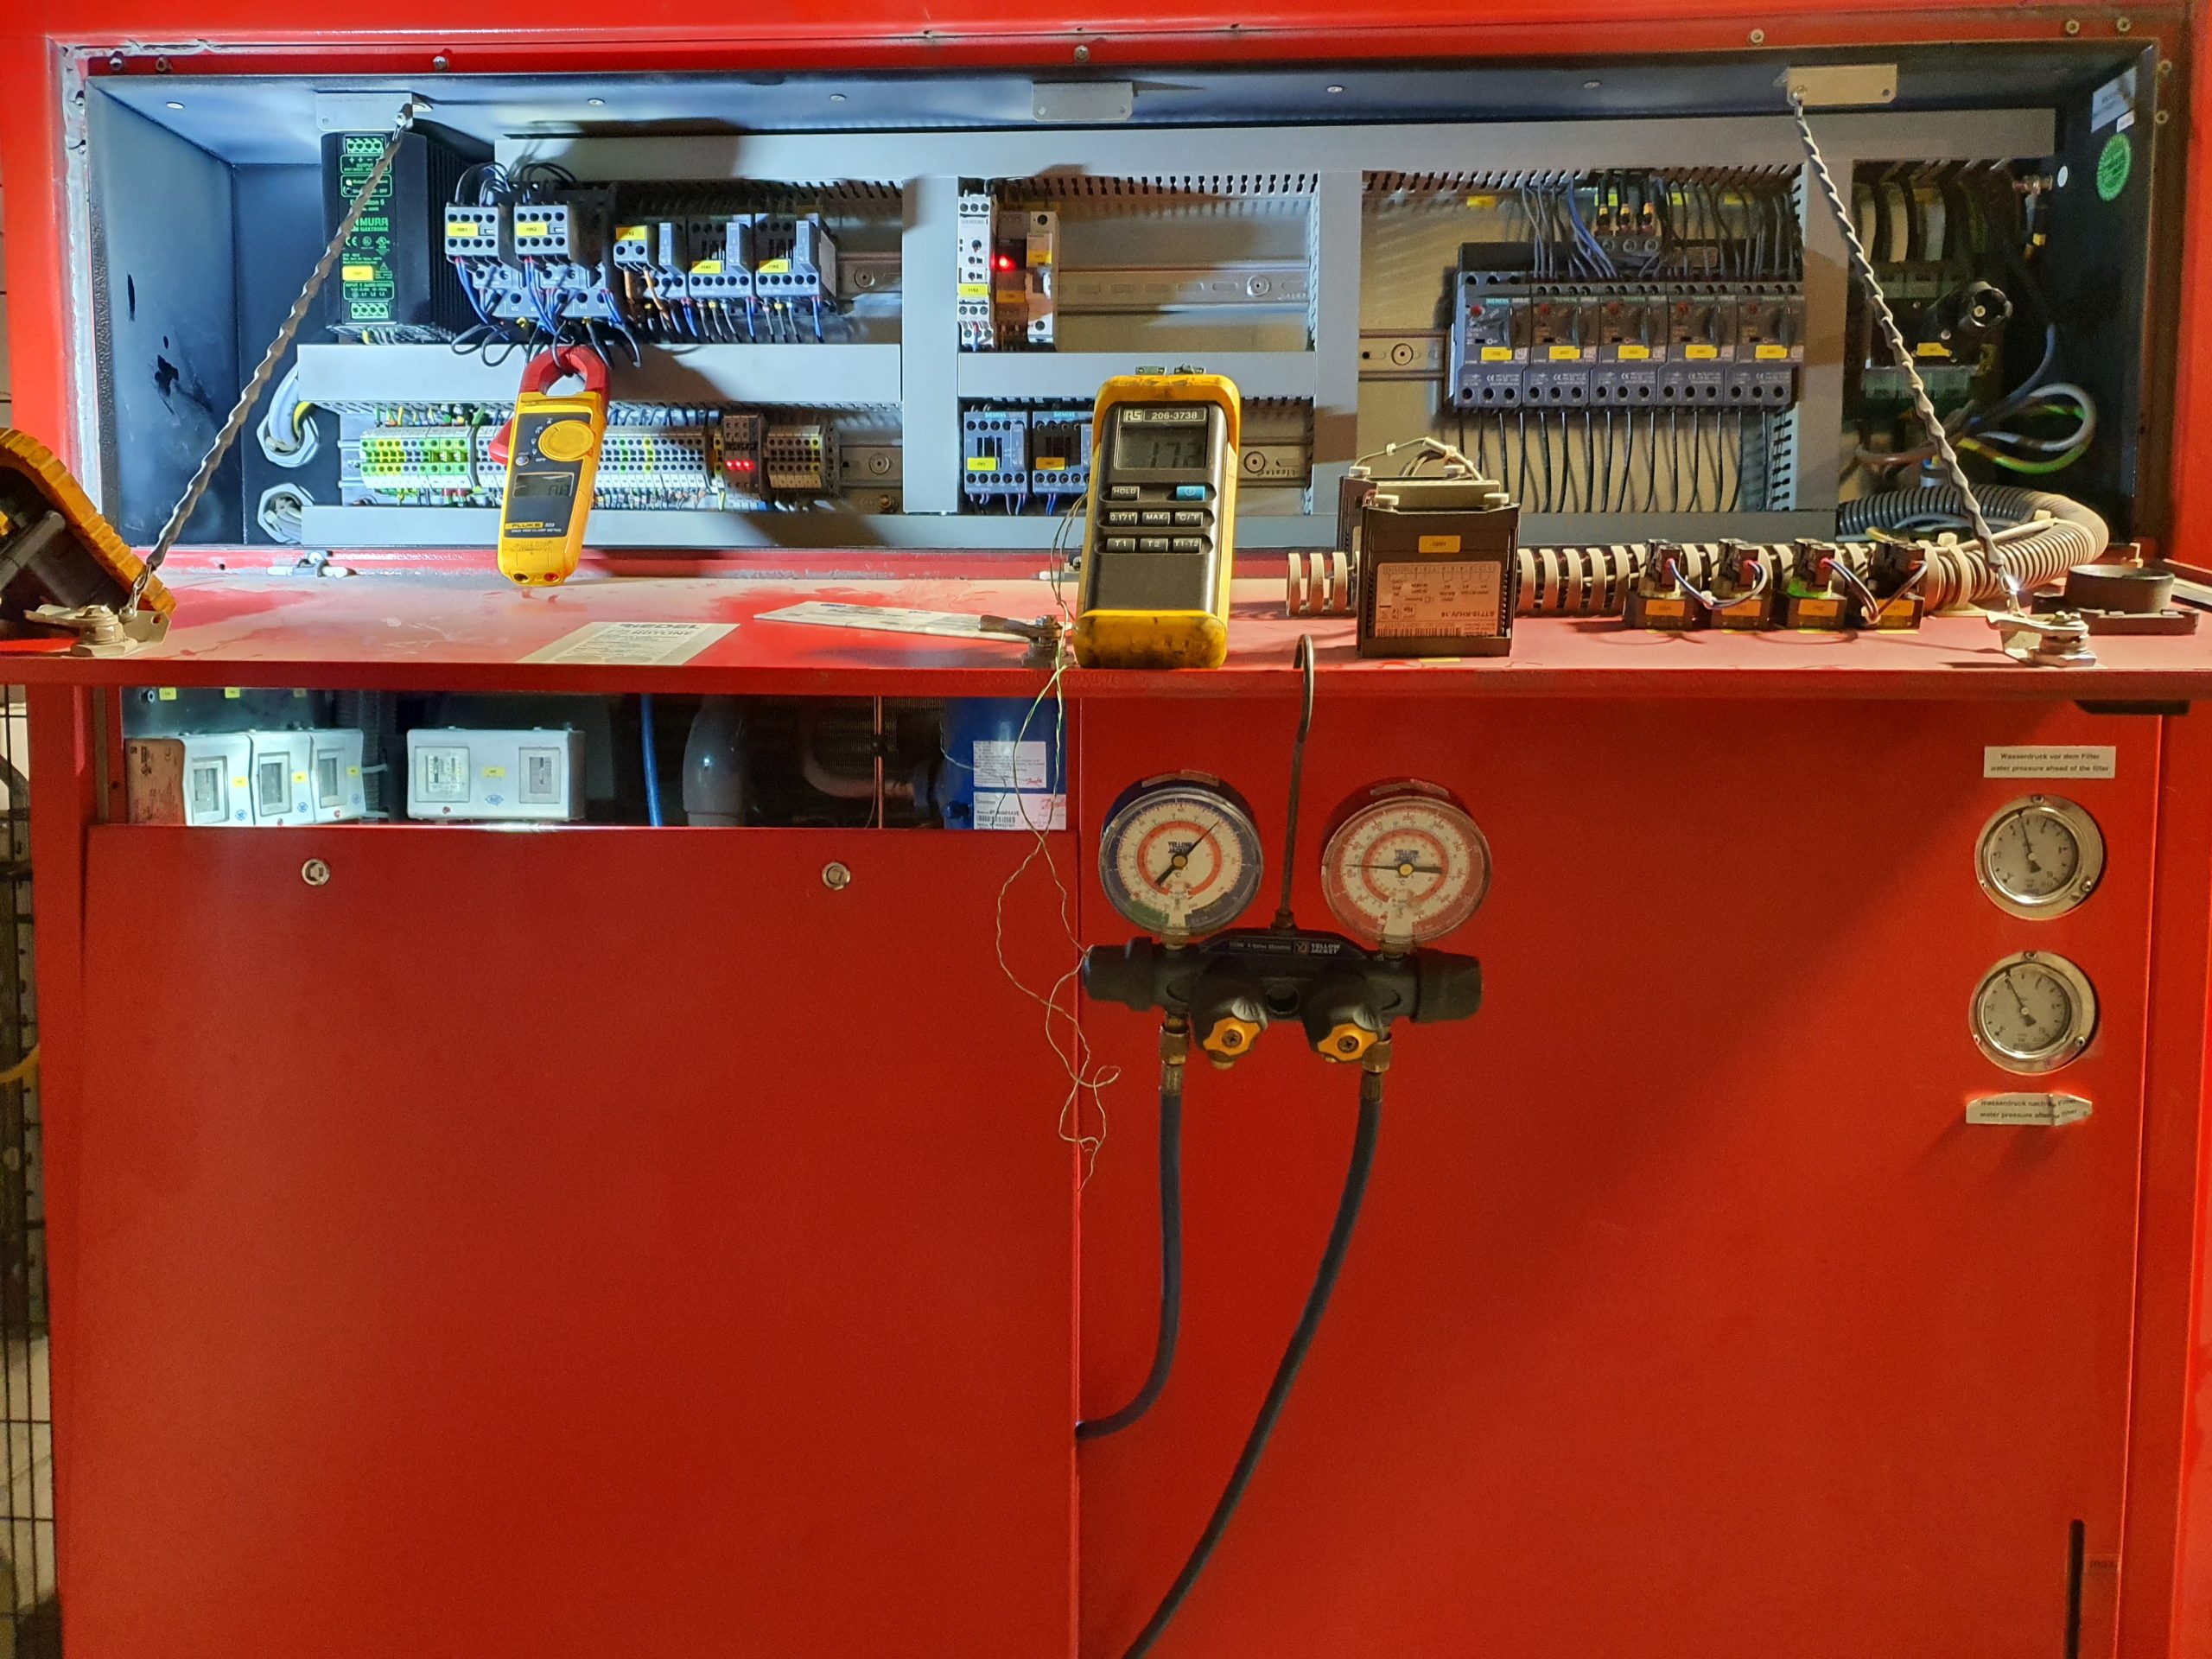 Red chiller with lantern illuminating the internal components showing test equipment for checking chiller efficiency